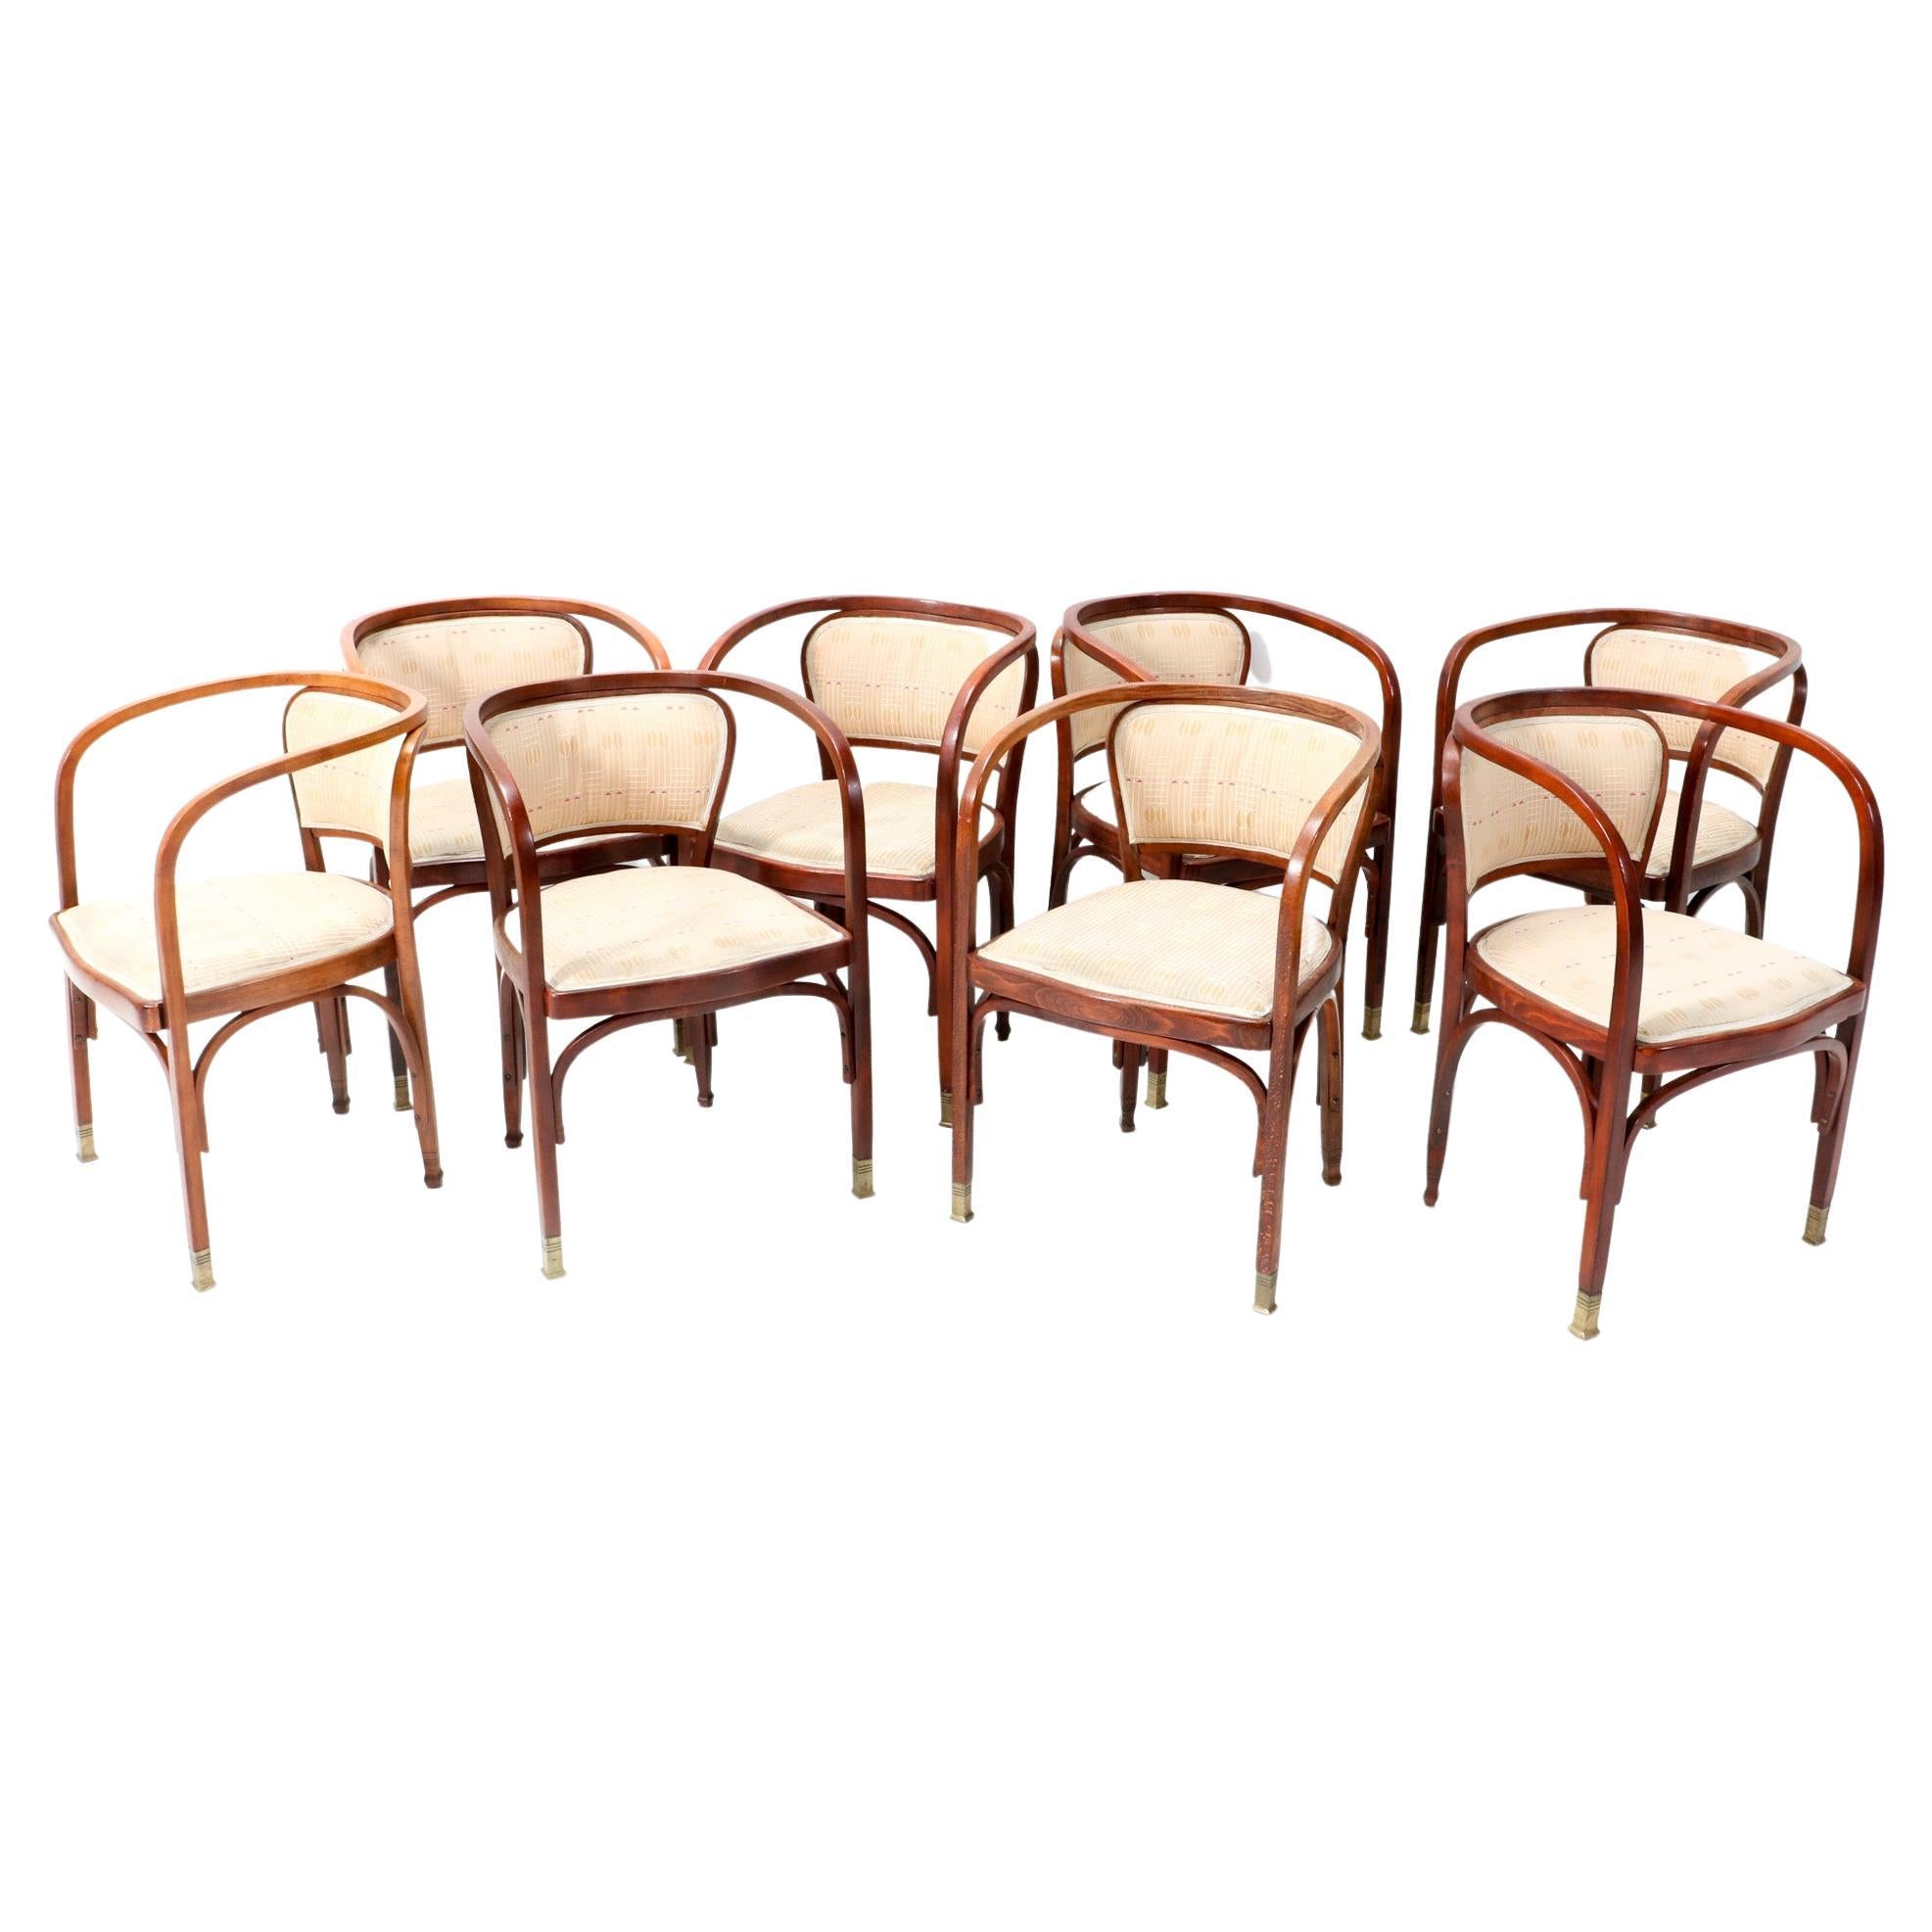 Eight Vienna Secession Armchairs by Gustav Siegel for Jacob & Josef Kohn, 1900s For Sale